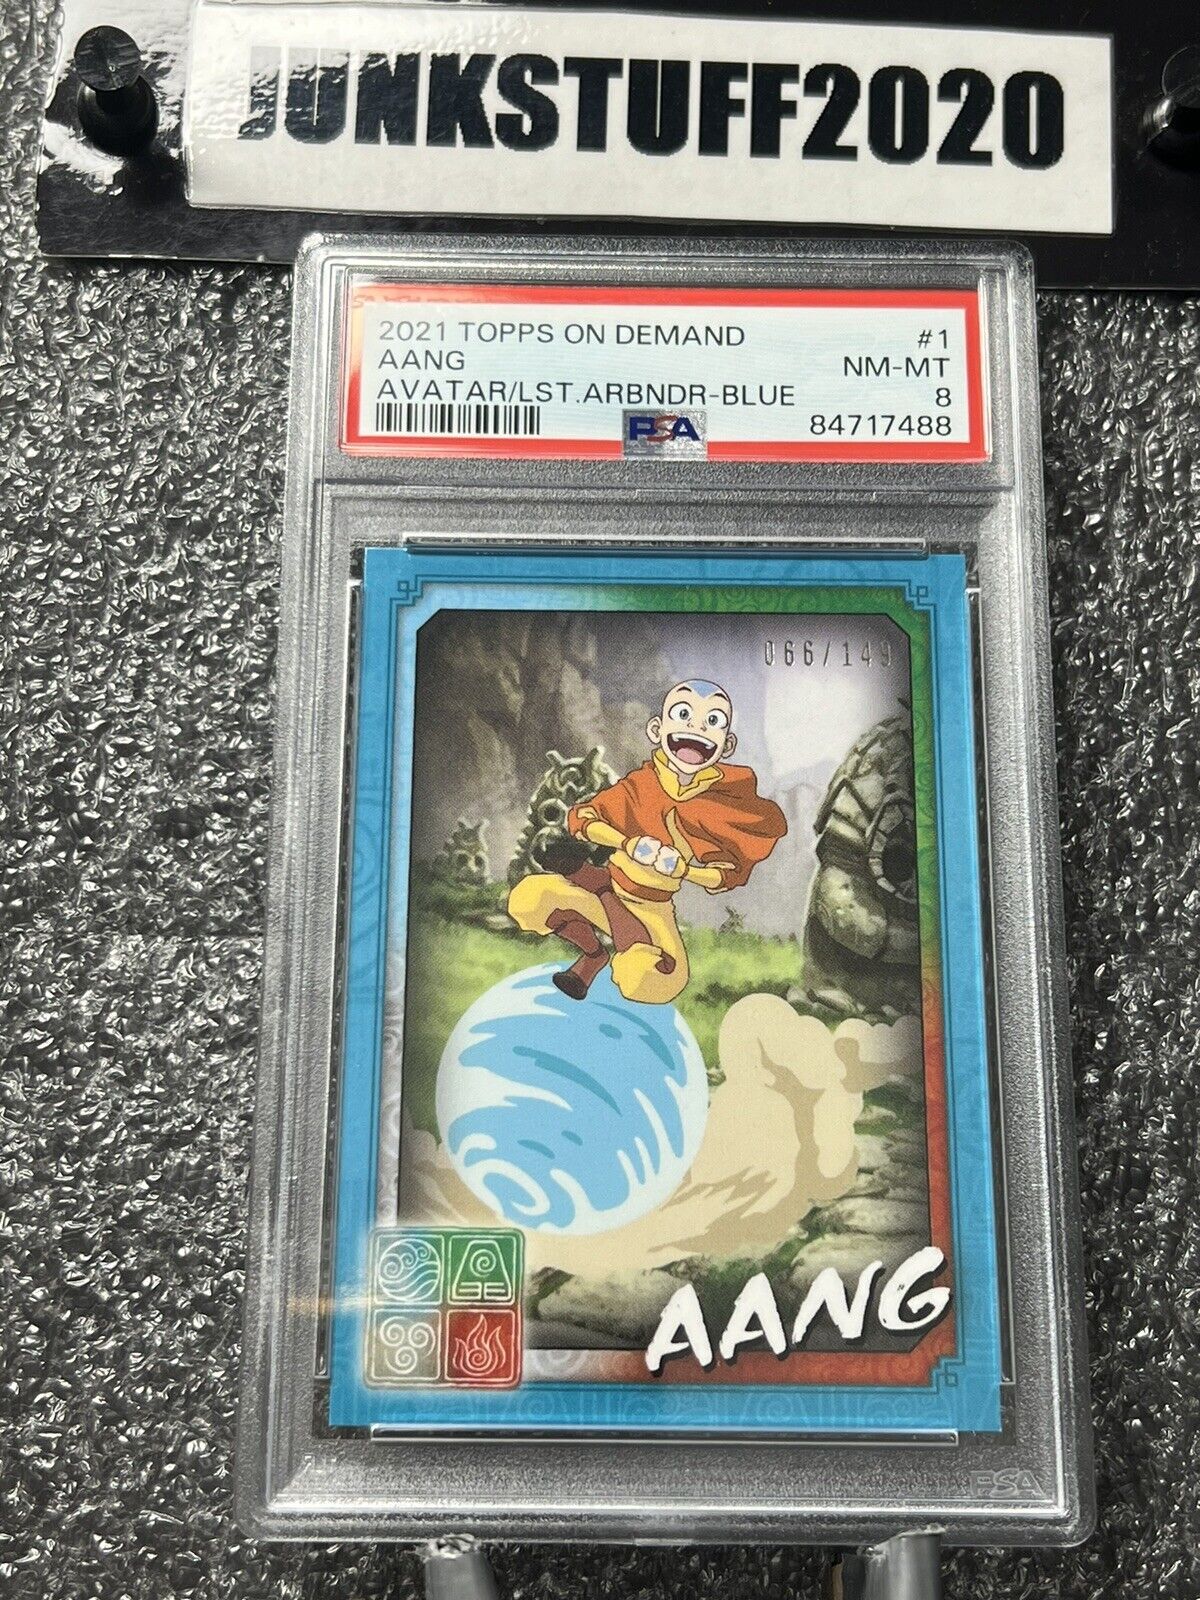 2021 Topps Aang Blue /149 PSA 8 Avatar The Last Airbender on demand SP 1 nm-Mint